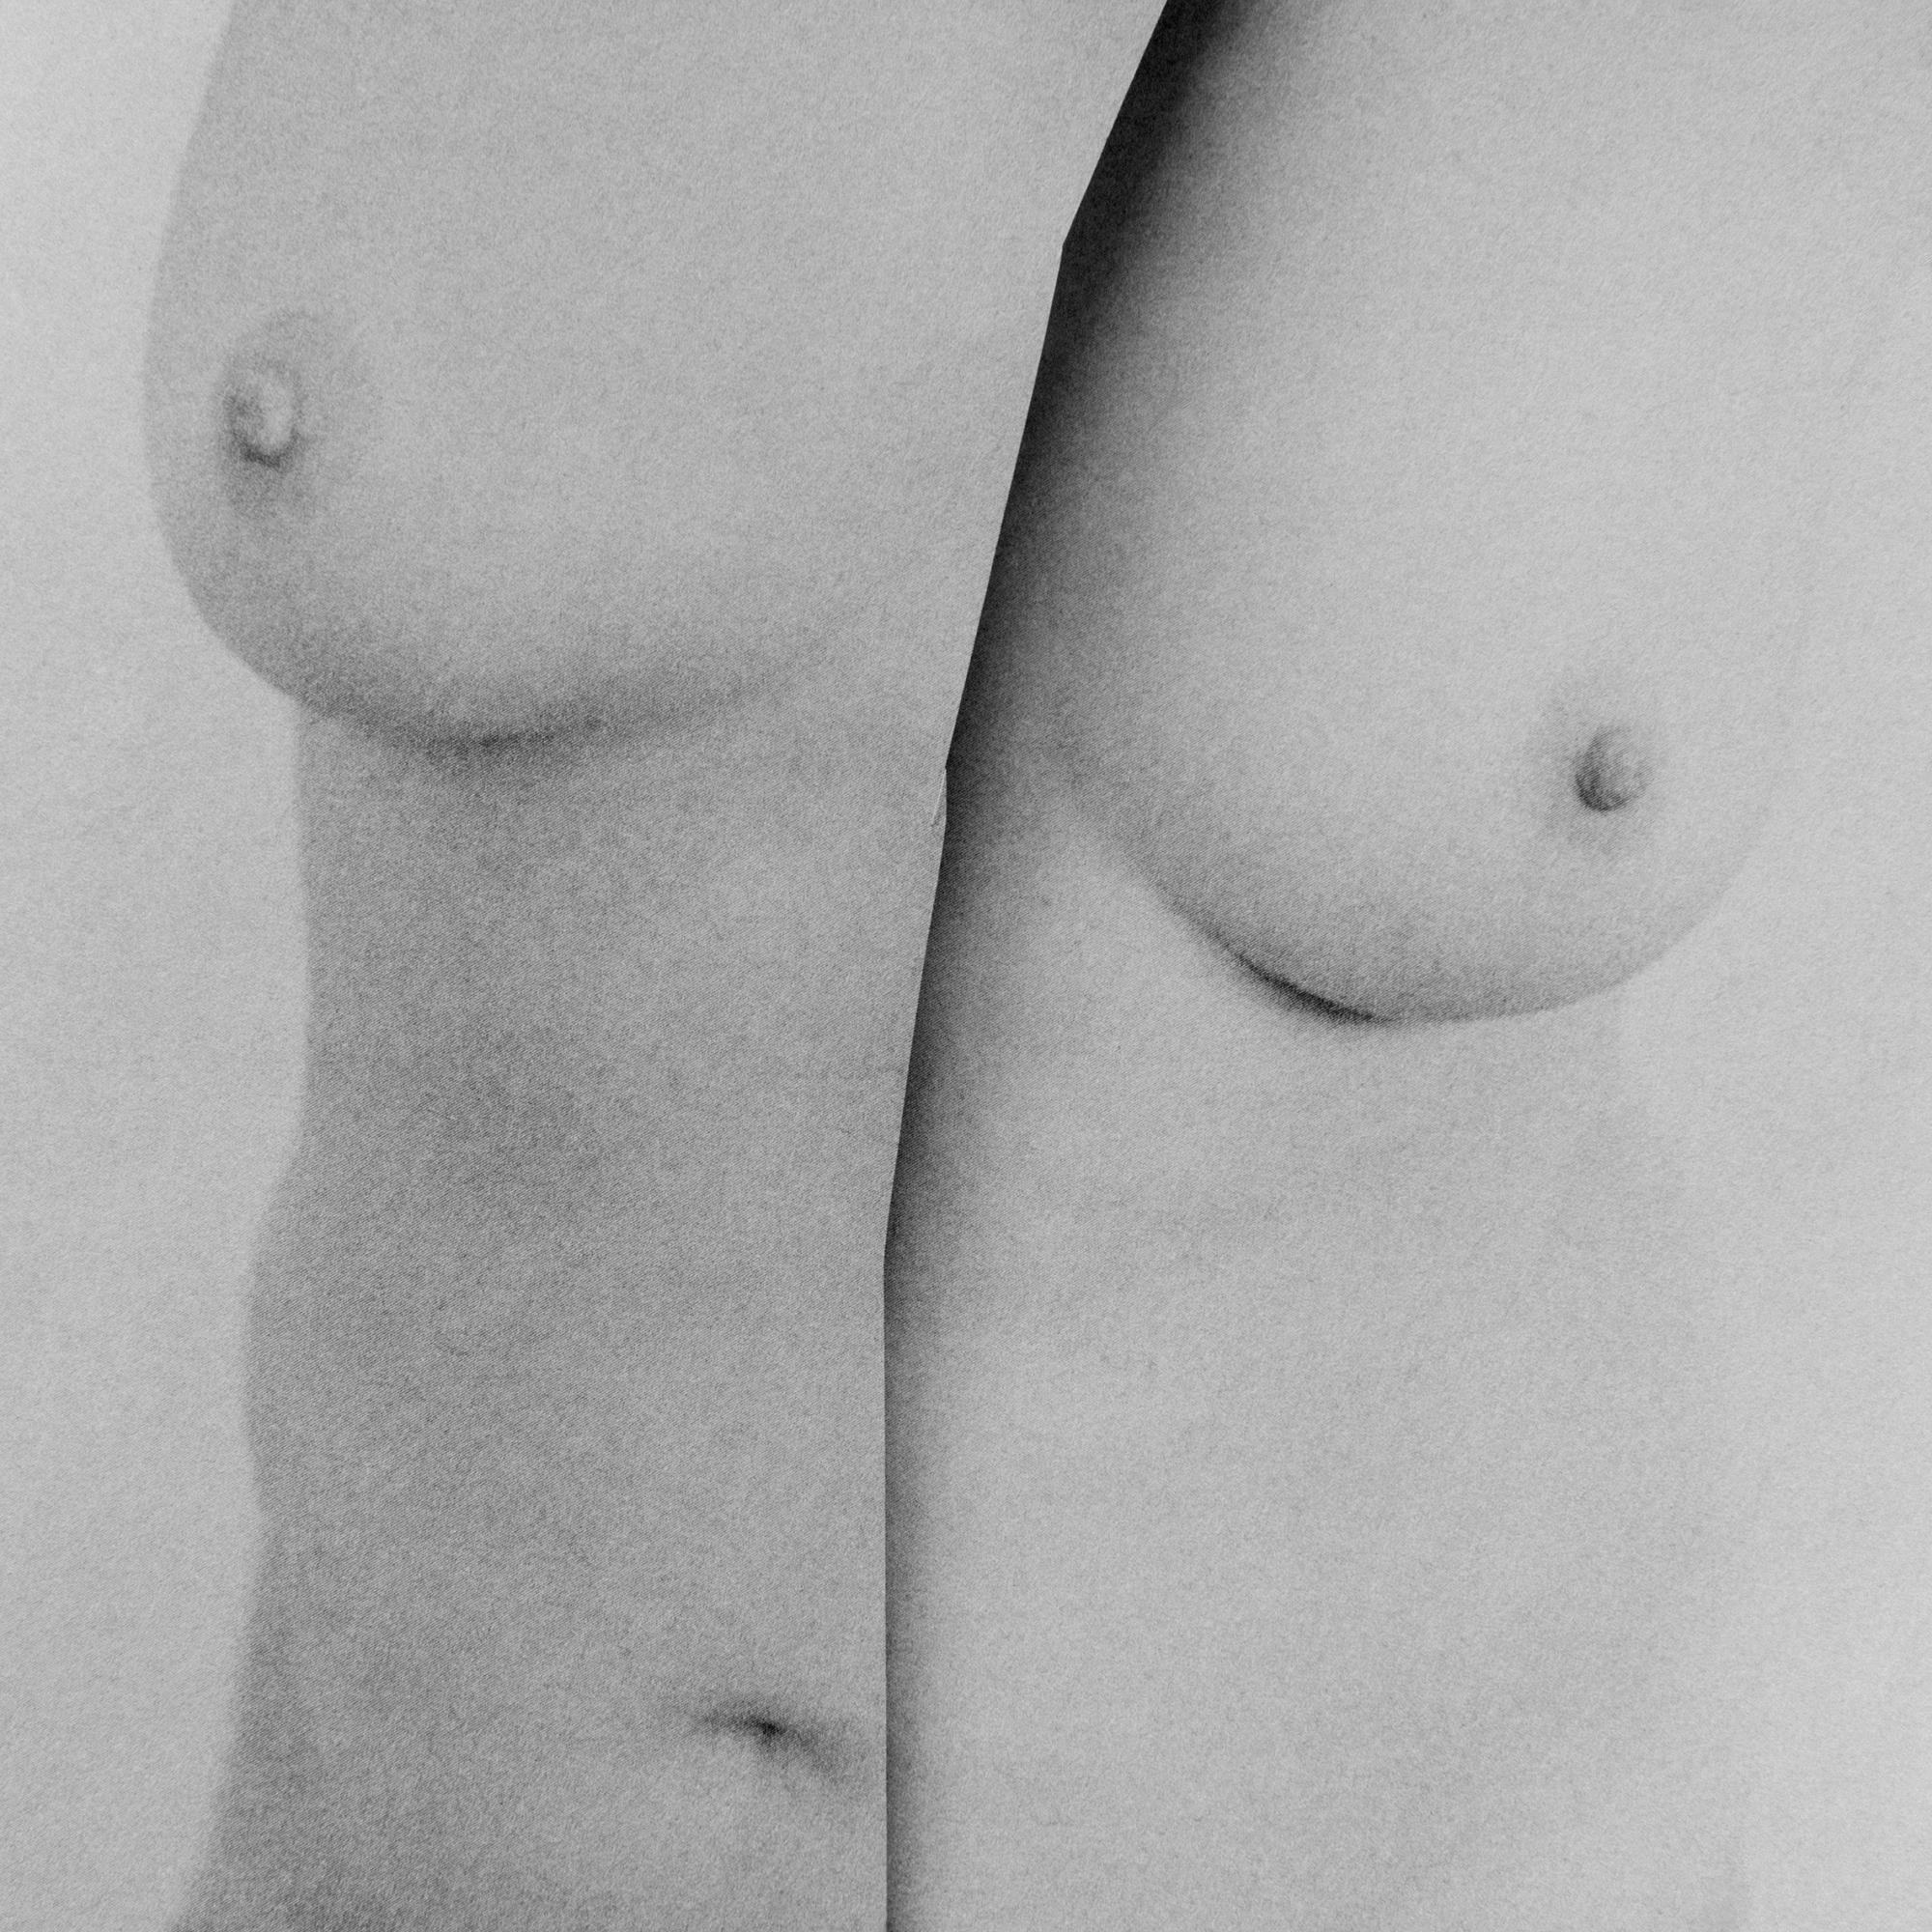 Brigitte LUSTENBERGER (*1969, Switzerland)
Not titled yet, from the series 'A Gaze of One's Own‘, 2021
Silver gelatin print on Baryta paper
Sheet 70 x 70 cm (27 1/2 x 27 1/2 in.)
Edition of 5, plus 2 AP; Edn. no. 1/5
print only

Born in Zurich,